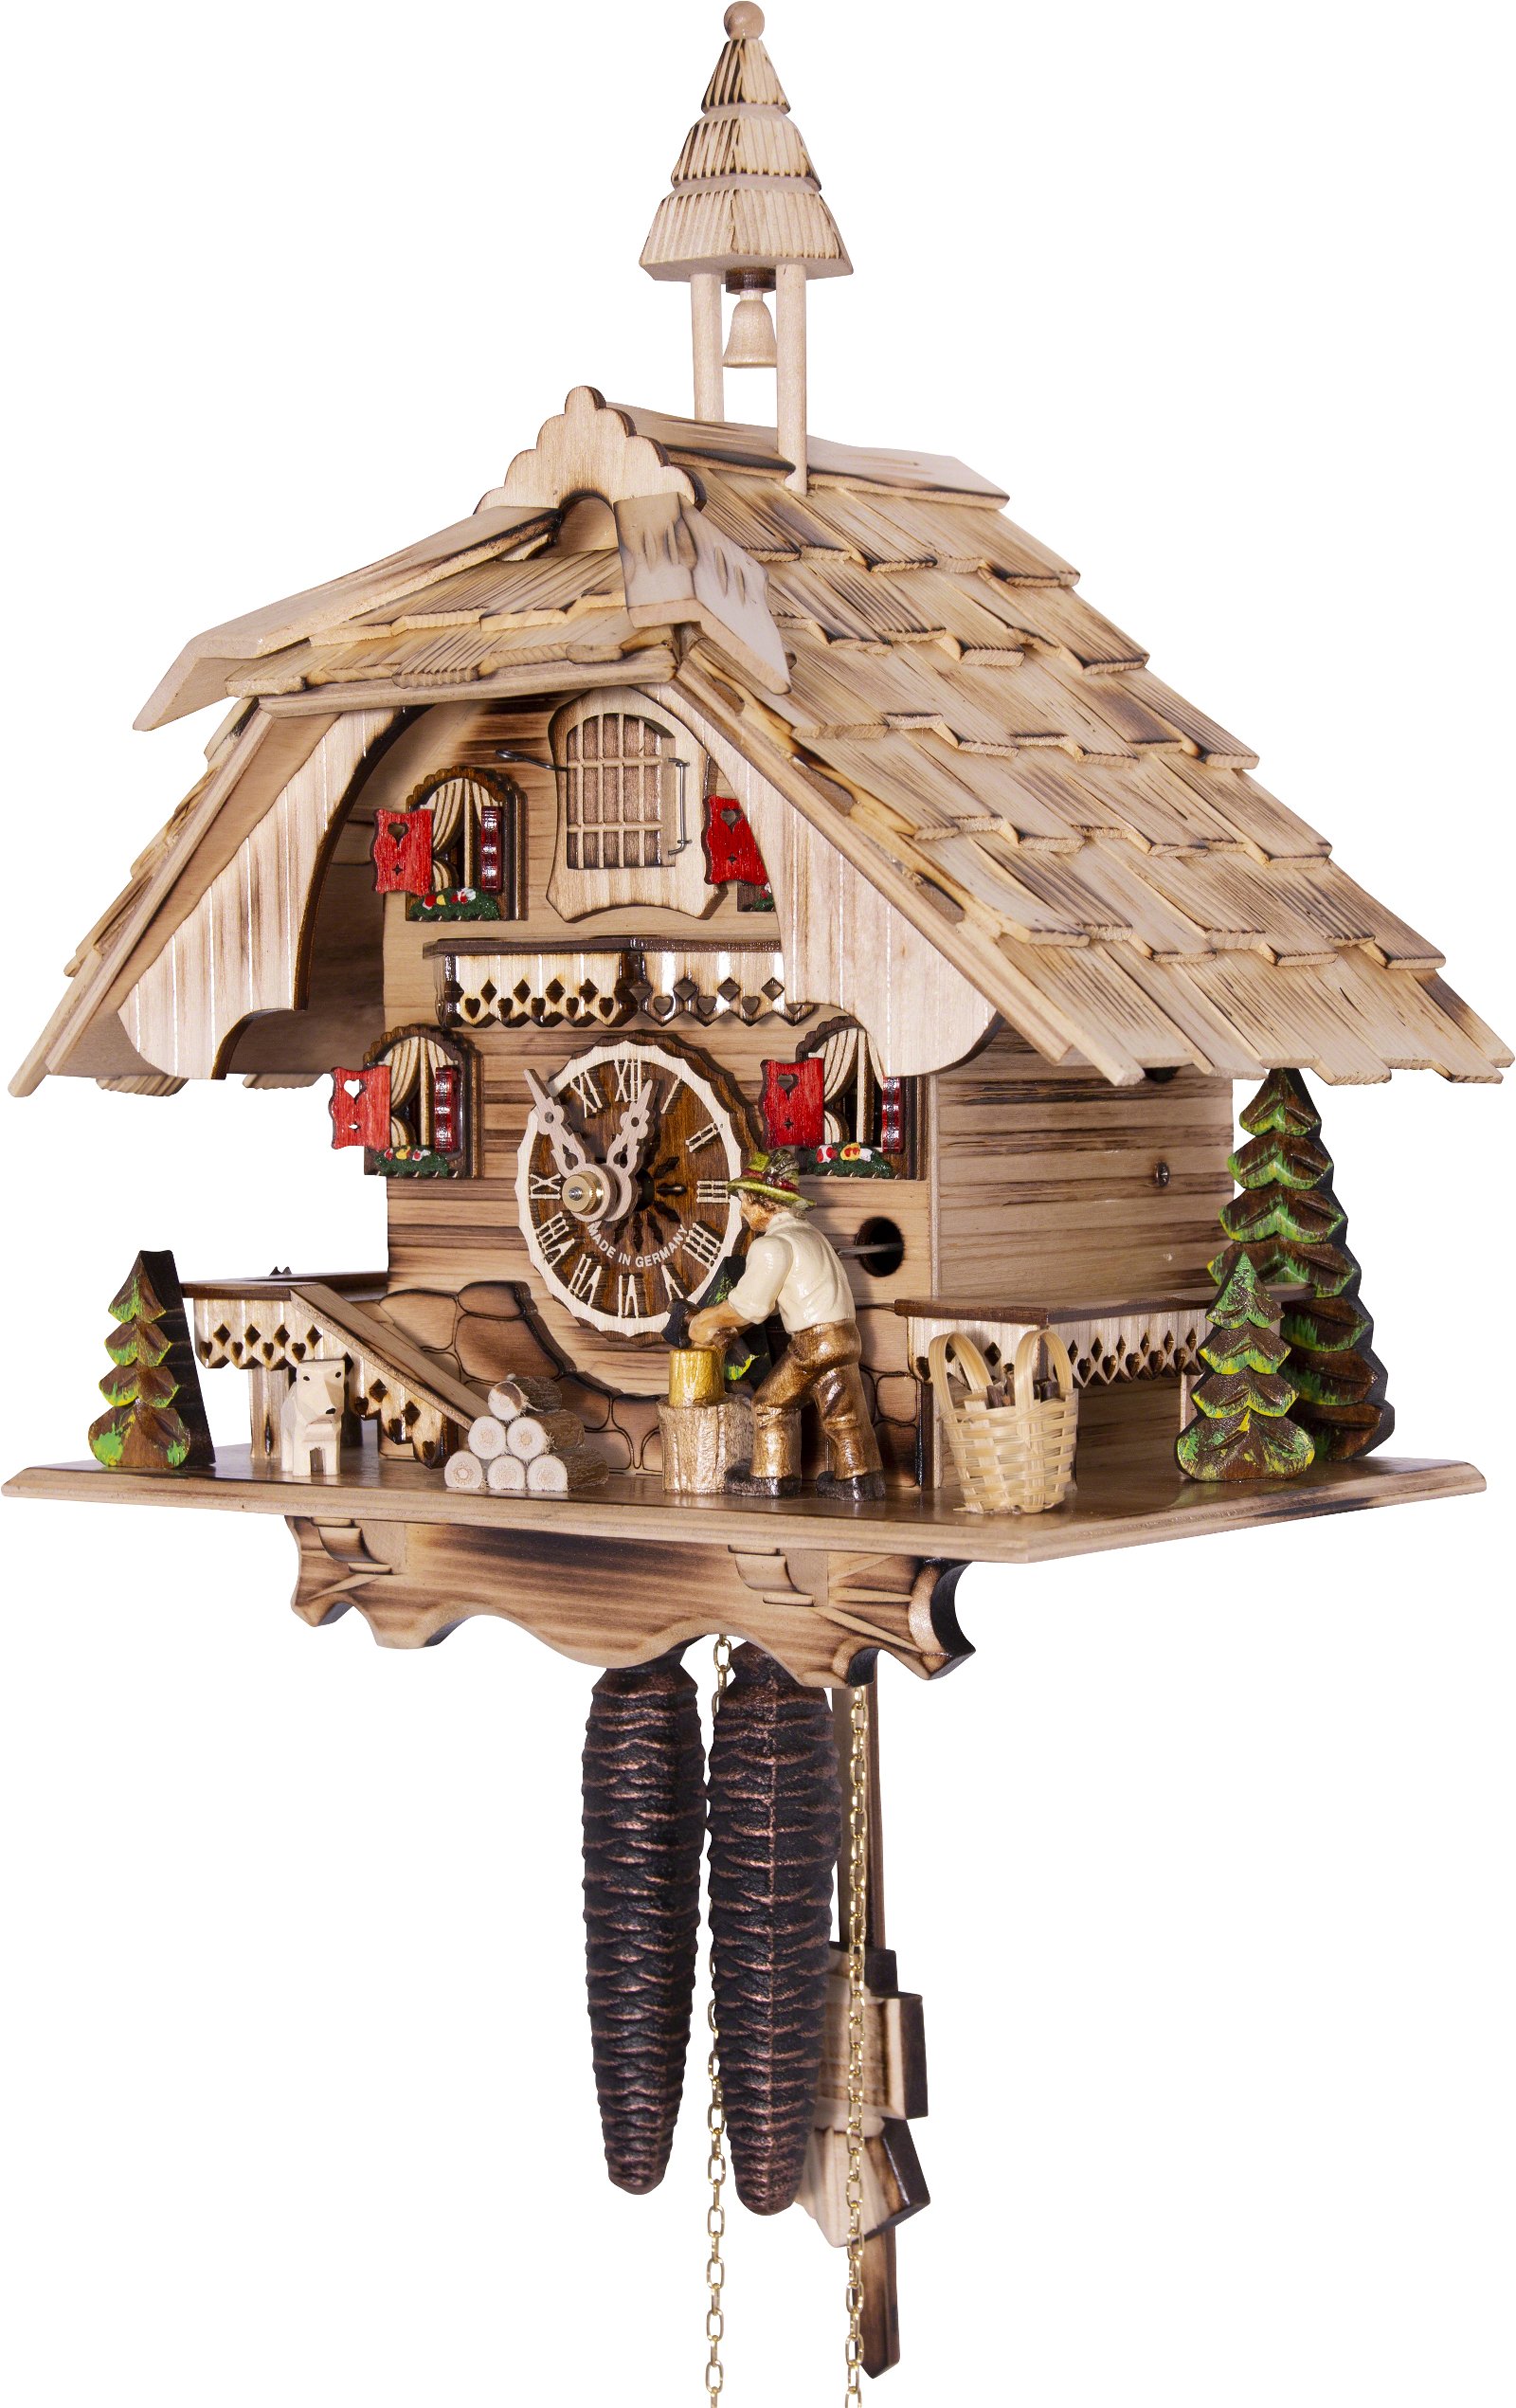 Cuckoo Clock Chalet Style 1 Day Movement 31cm by Engstler